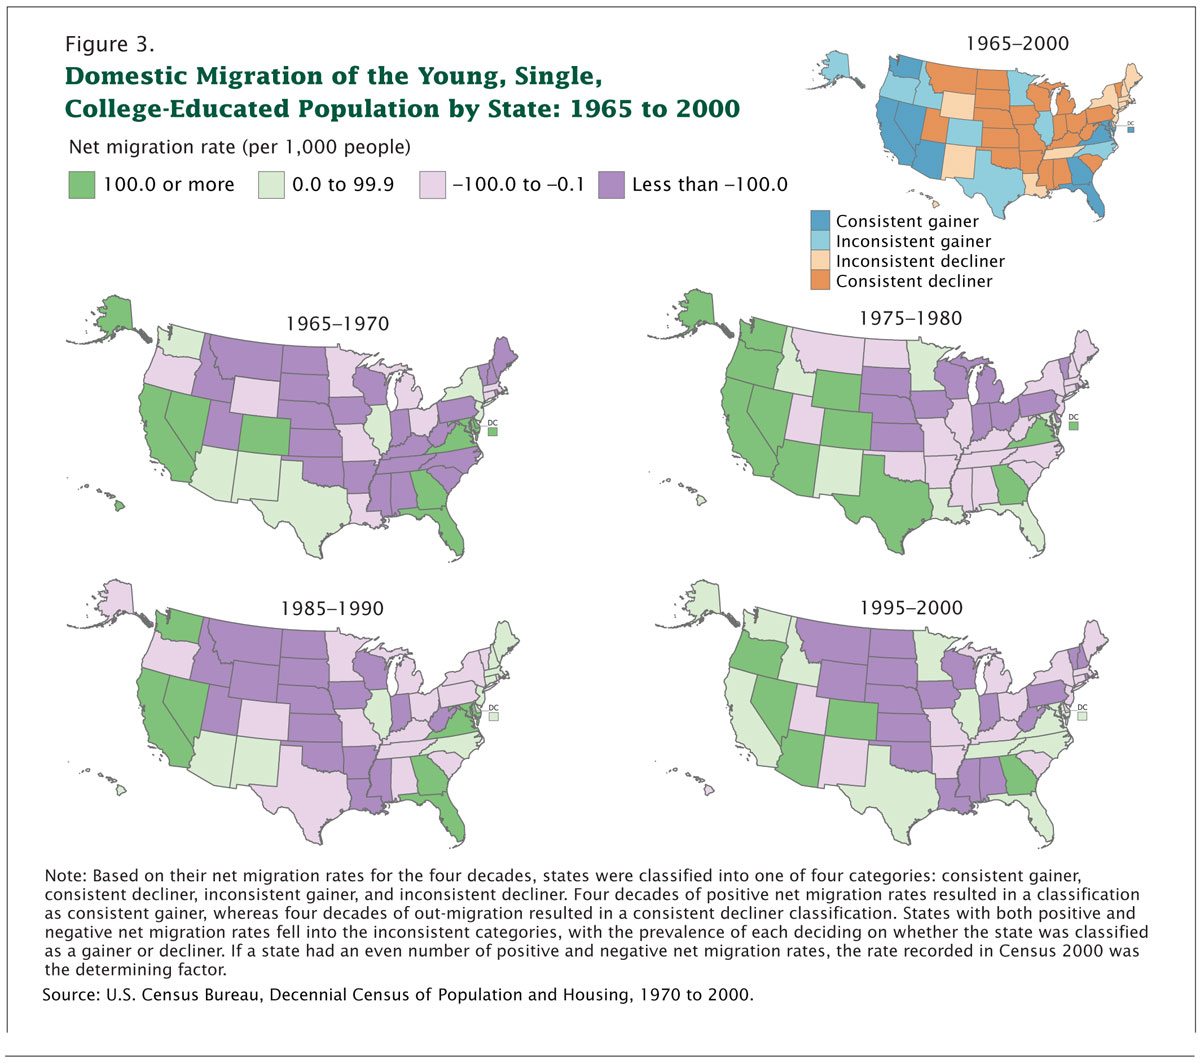 Domestic Migration of the Young, Single, College-Educated Population by State: 1965 to 2000